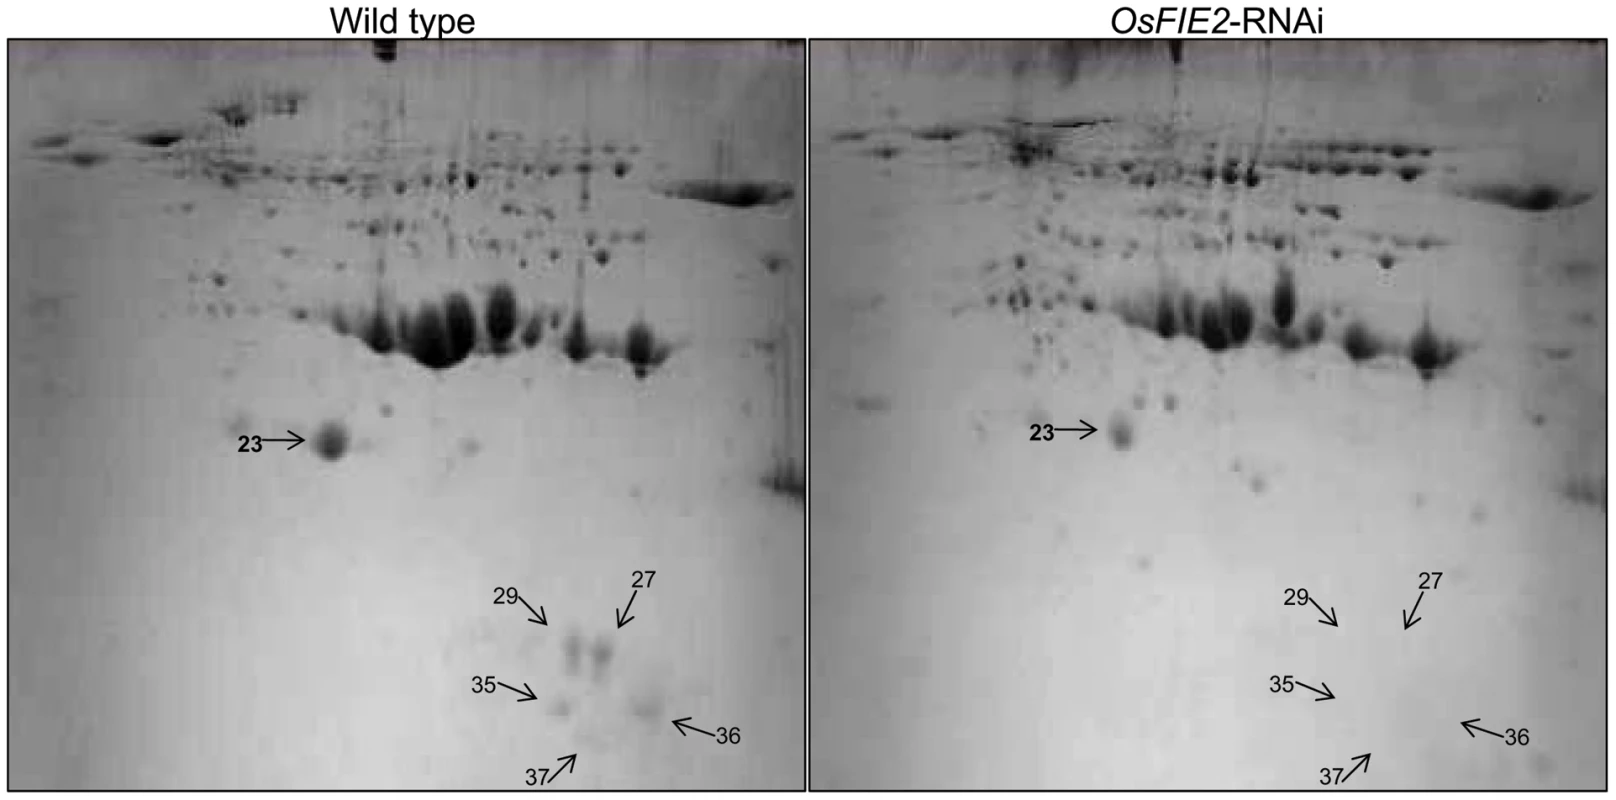 2-DE gel images of rice seed proteins from weak <i>OsFIE2</i>-RNAi and wild-type plants.